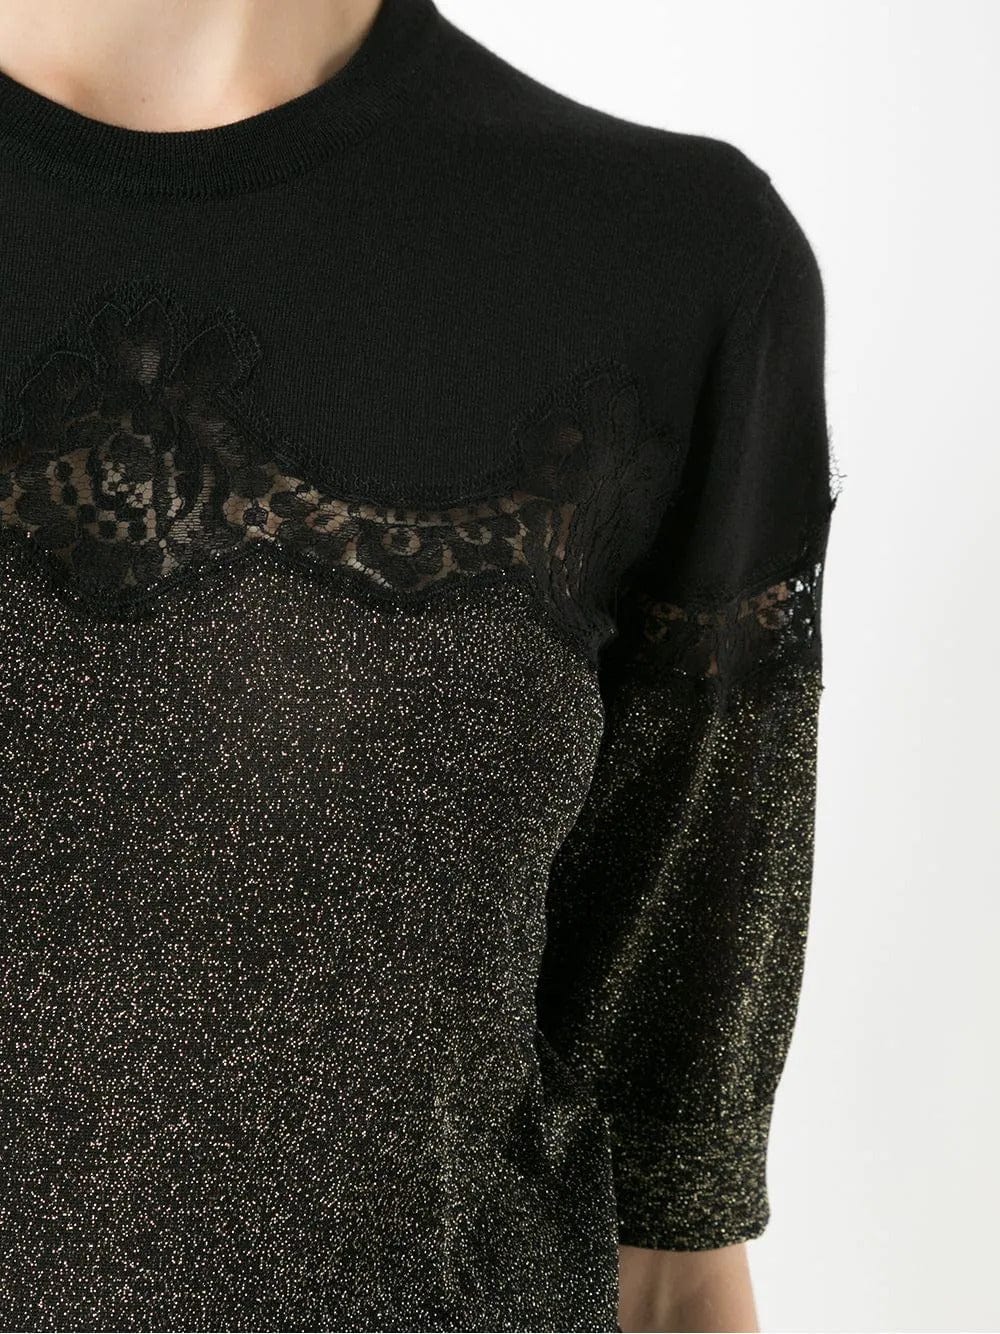 Dolce & Gabbana Lace-Trimmed Knit Sweater